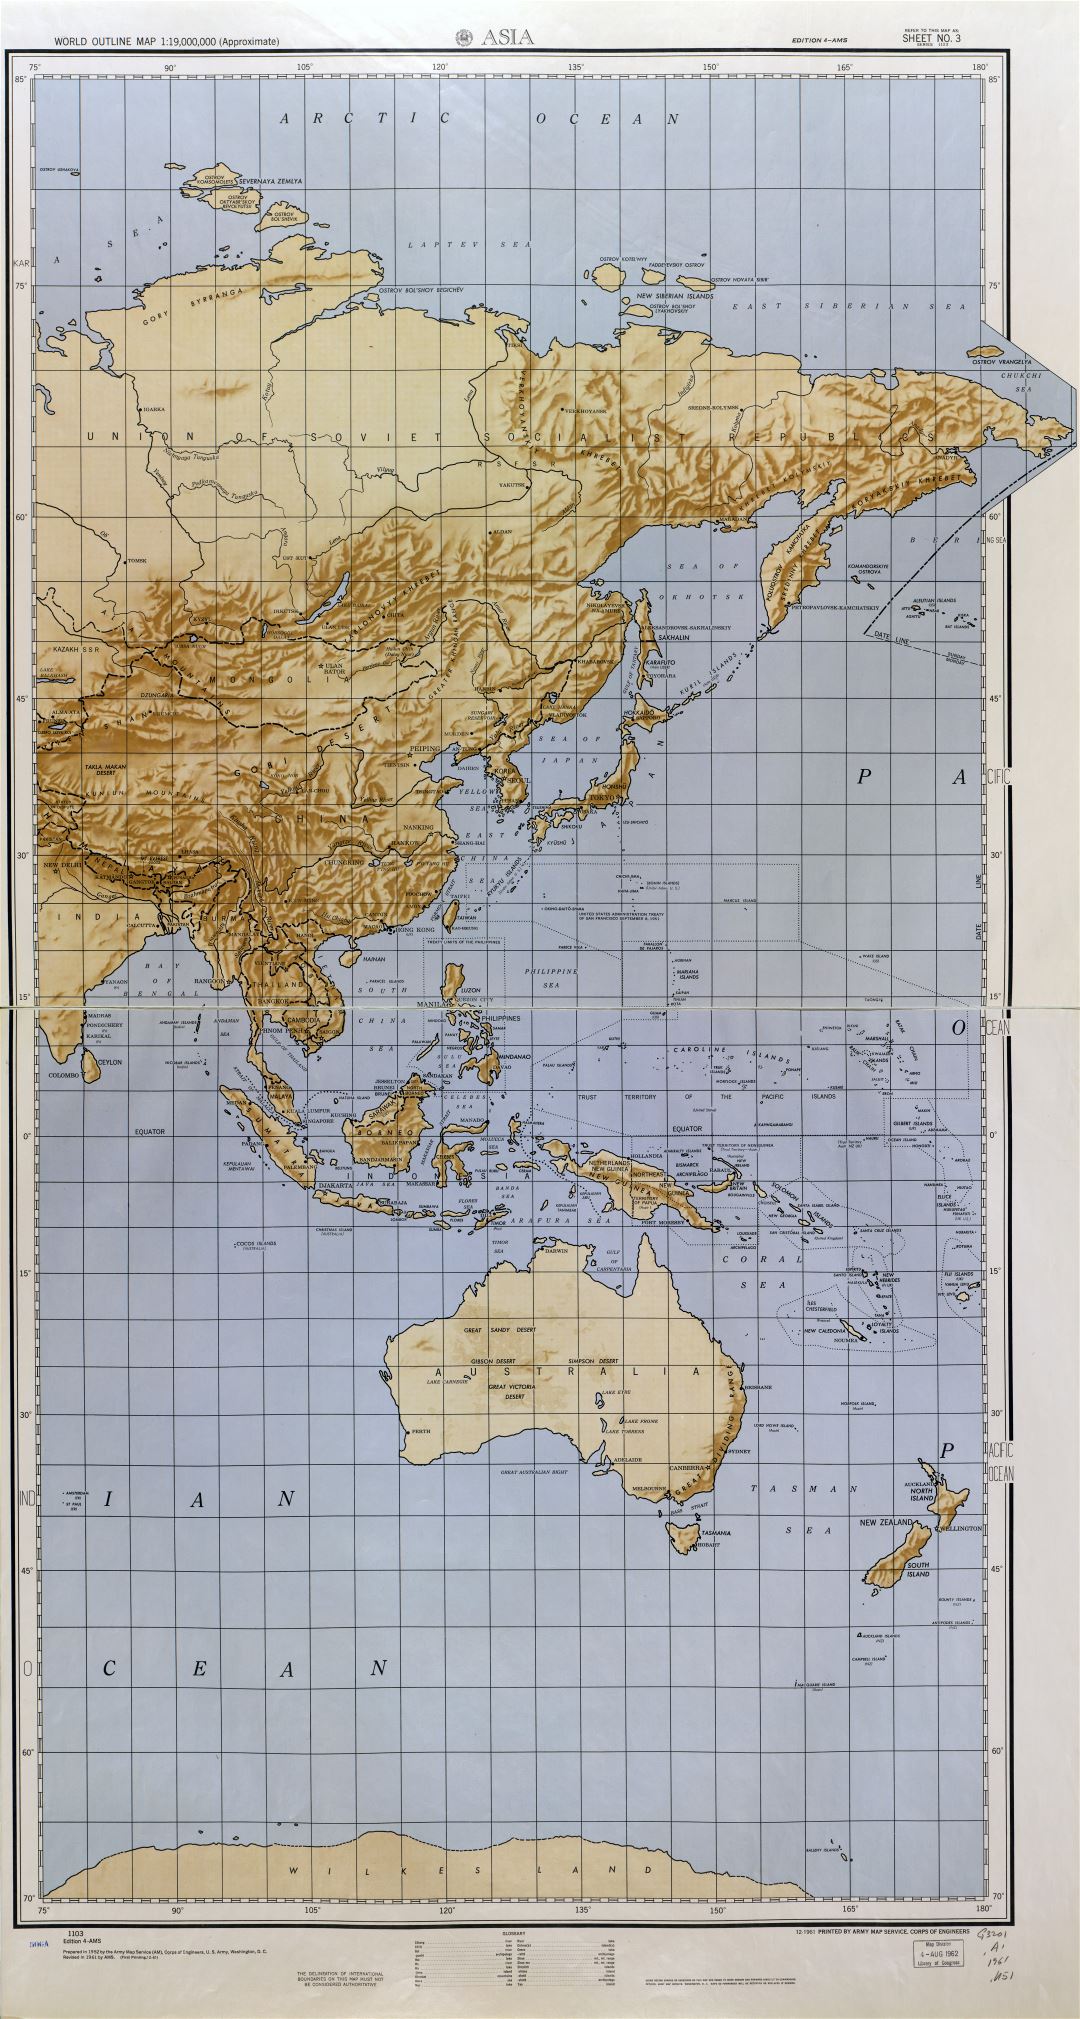 Large scale detailed World outline map with relief - part 3 (Asia) 1961-62